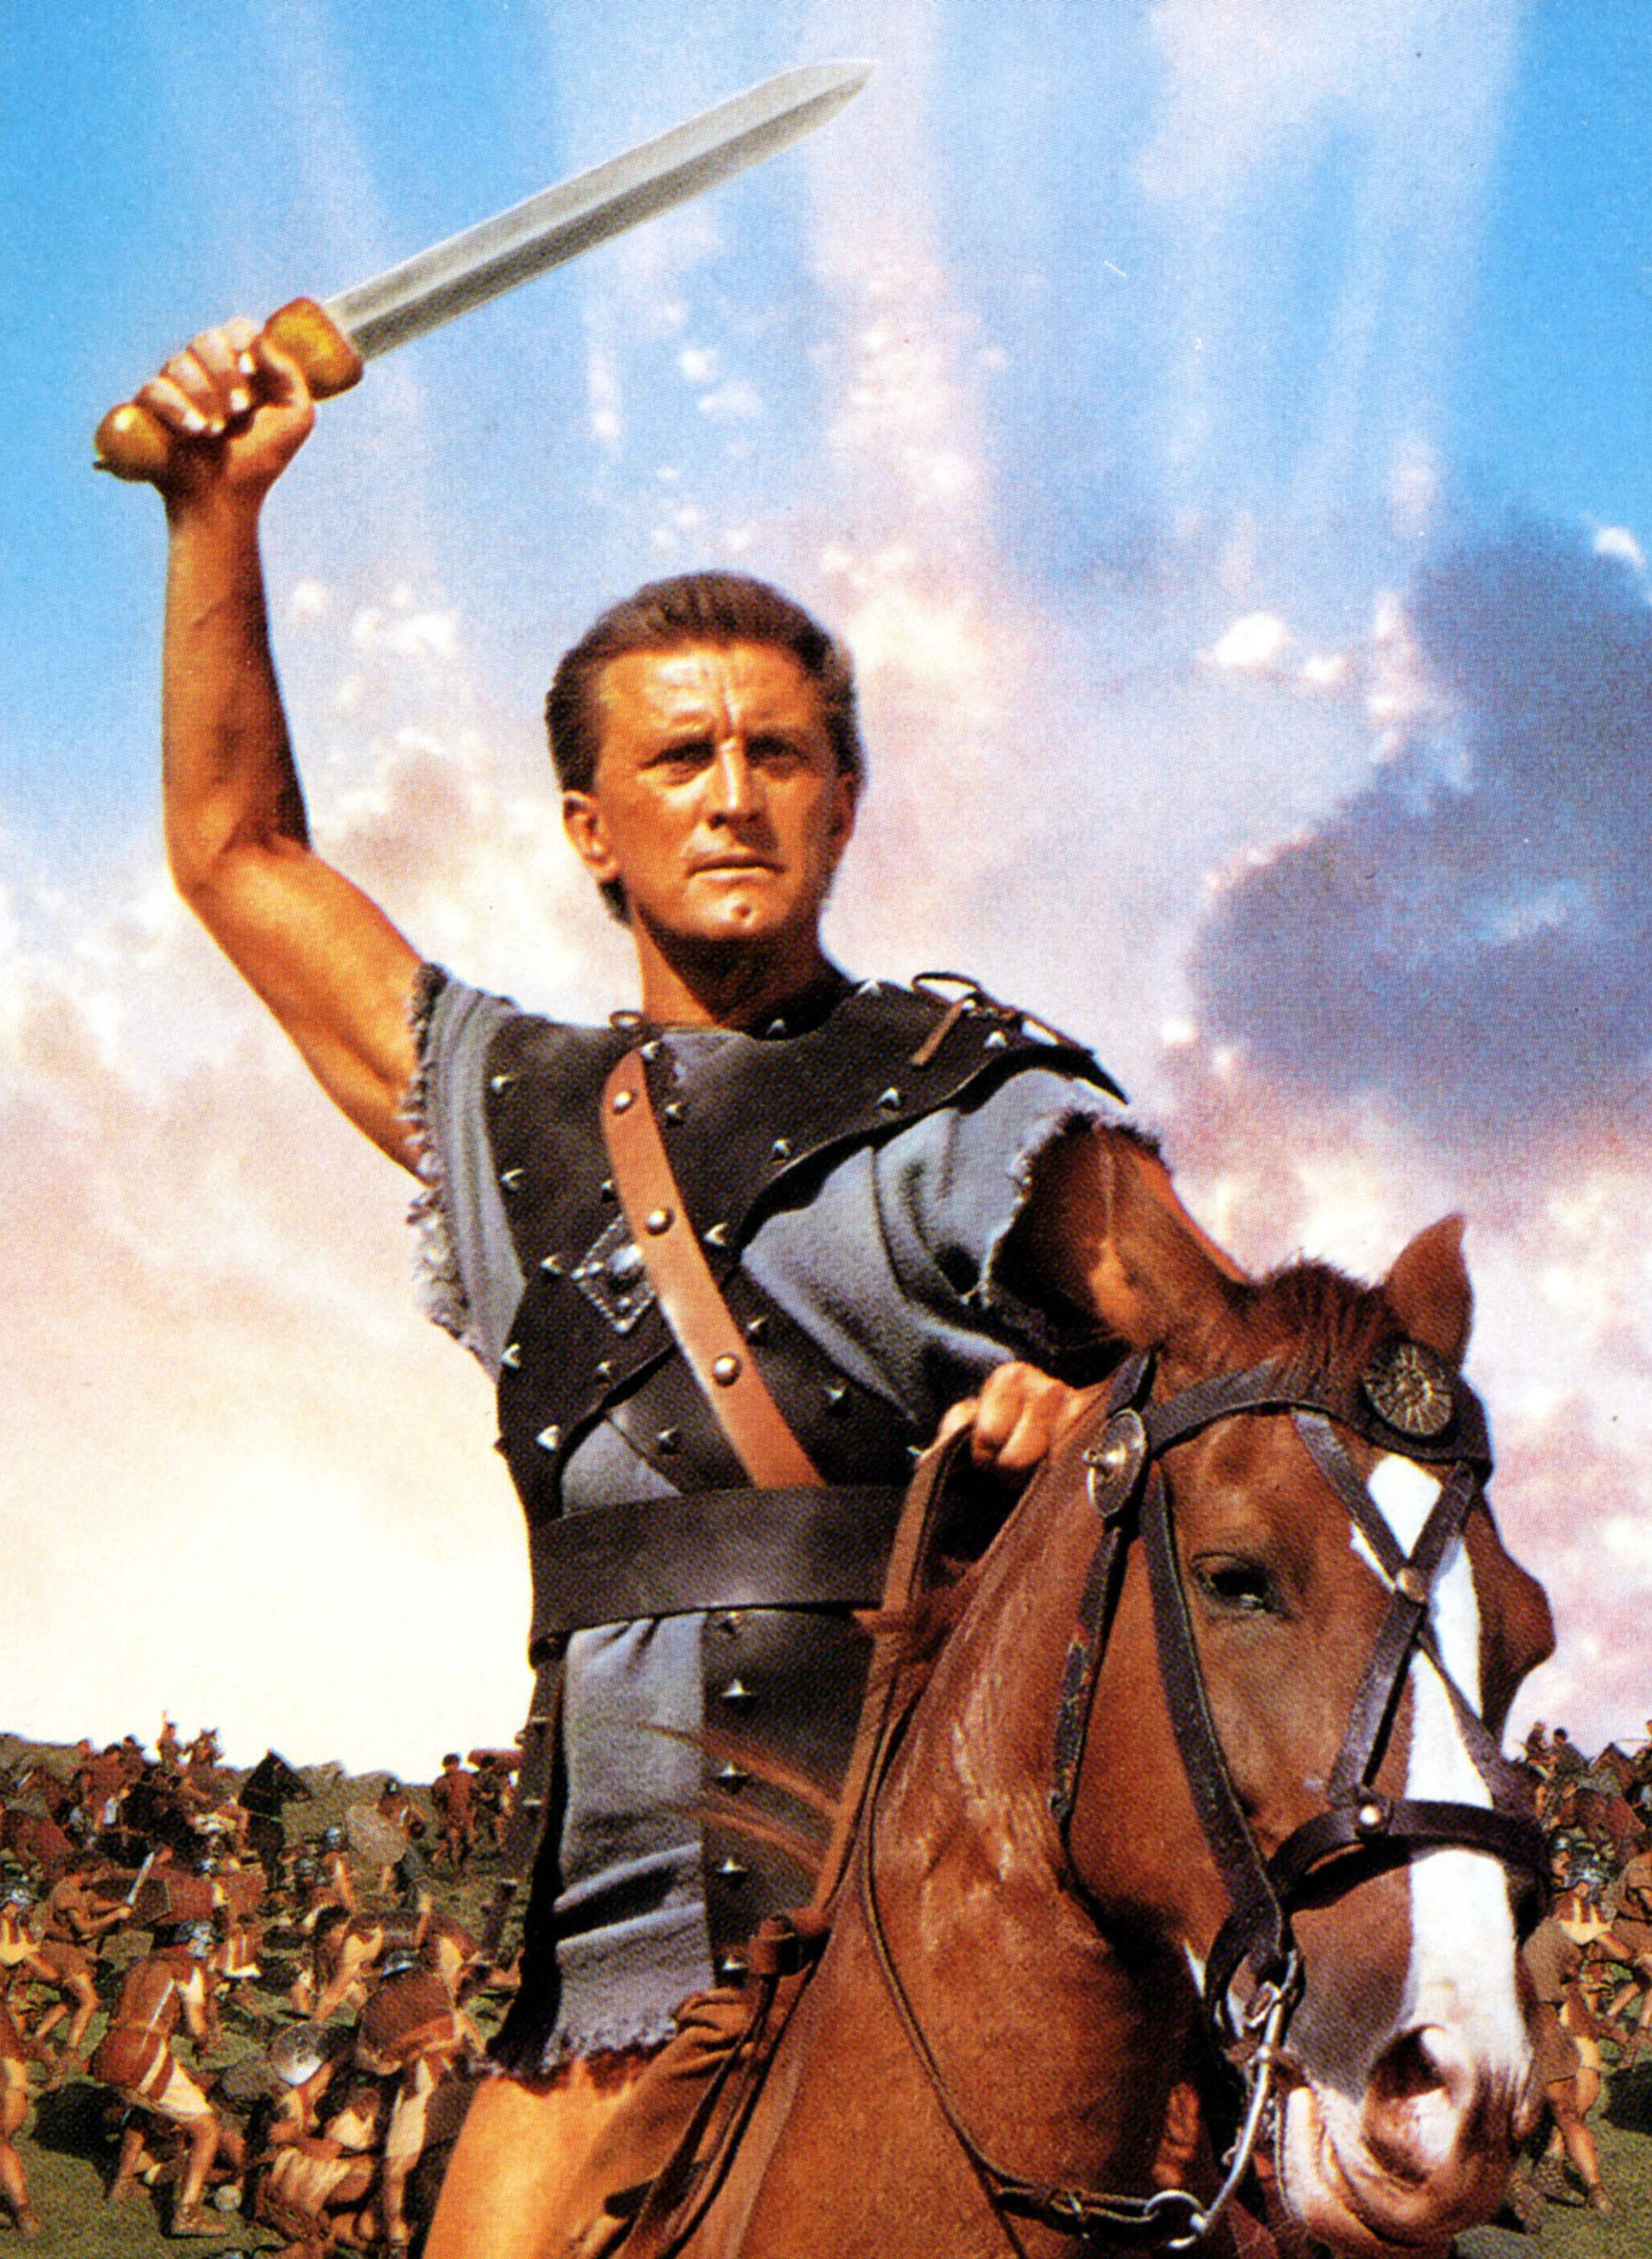 Kirk Douglas as Spartacus in 1960. (Mary Evans—Ronald Grant/Everett Collection)